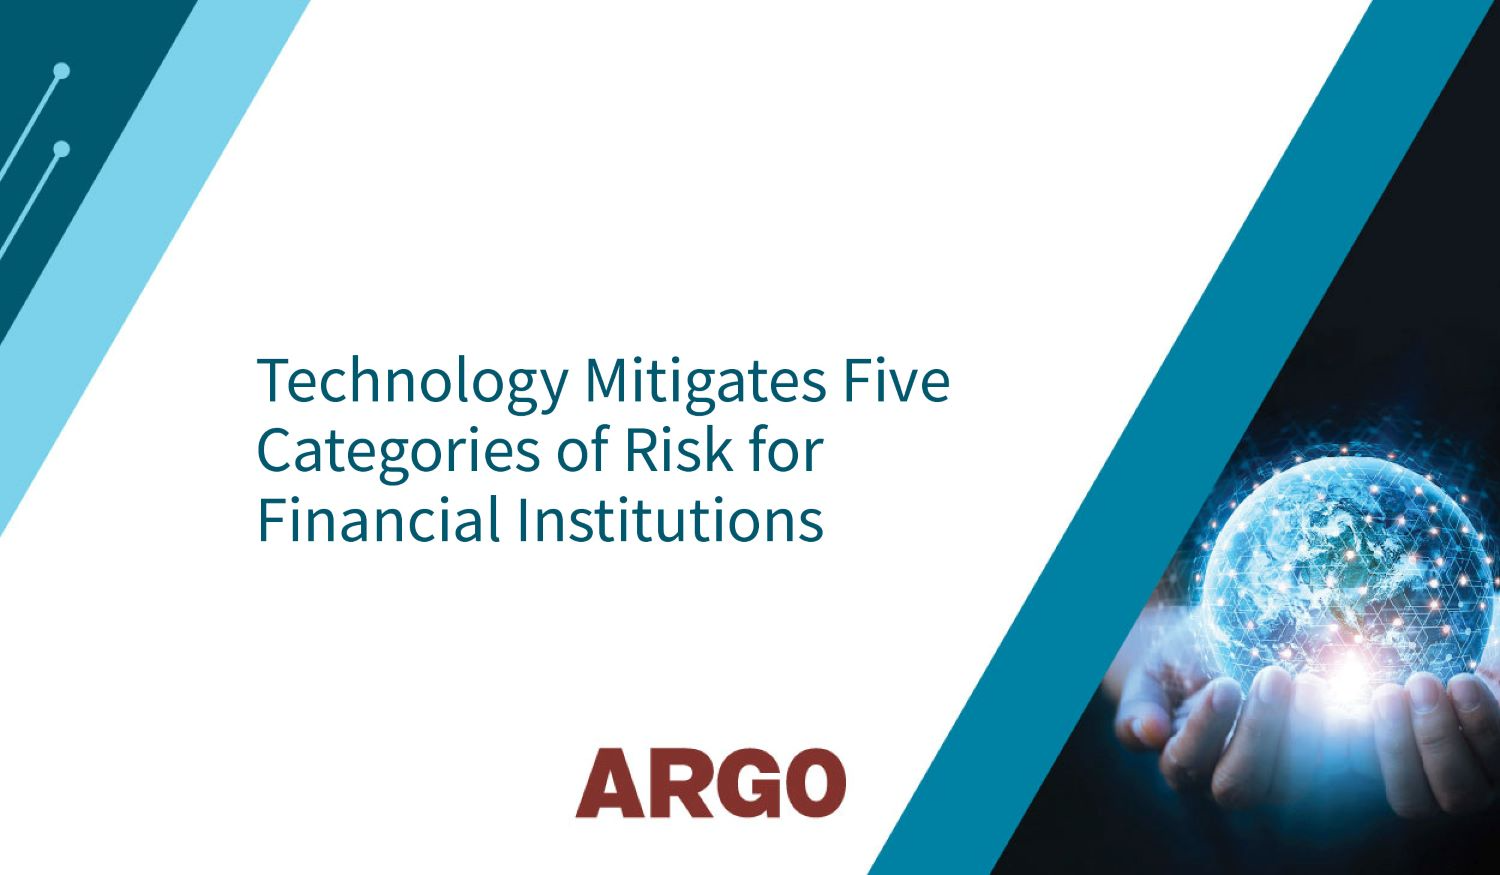 Technology Mitigates Five Categories of Risk for Financial Institutions